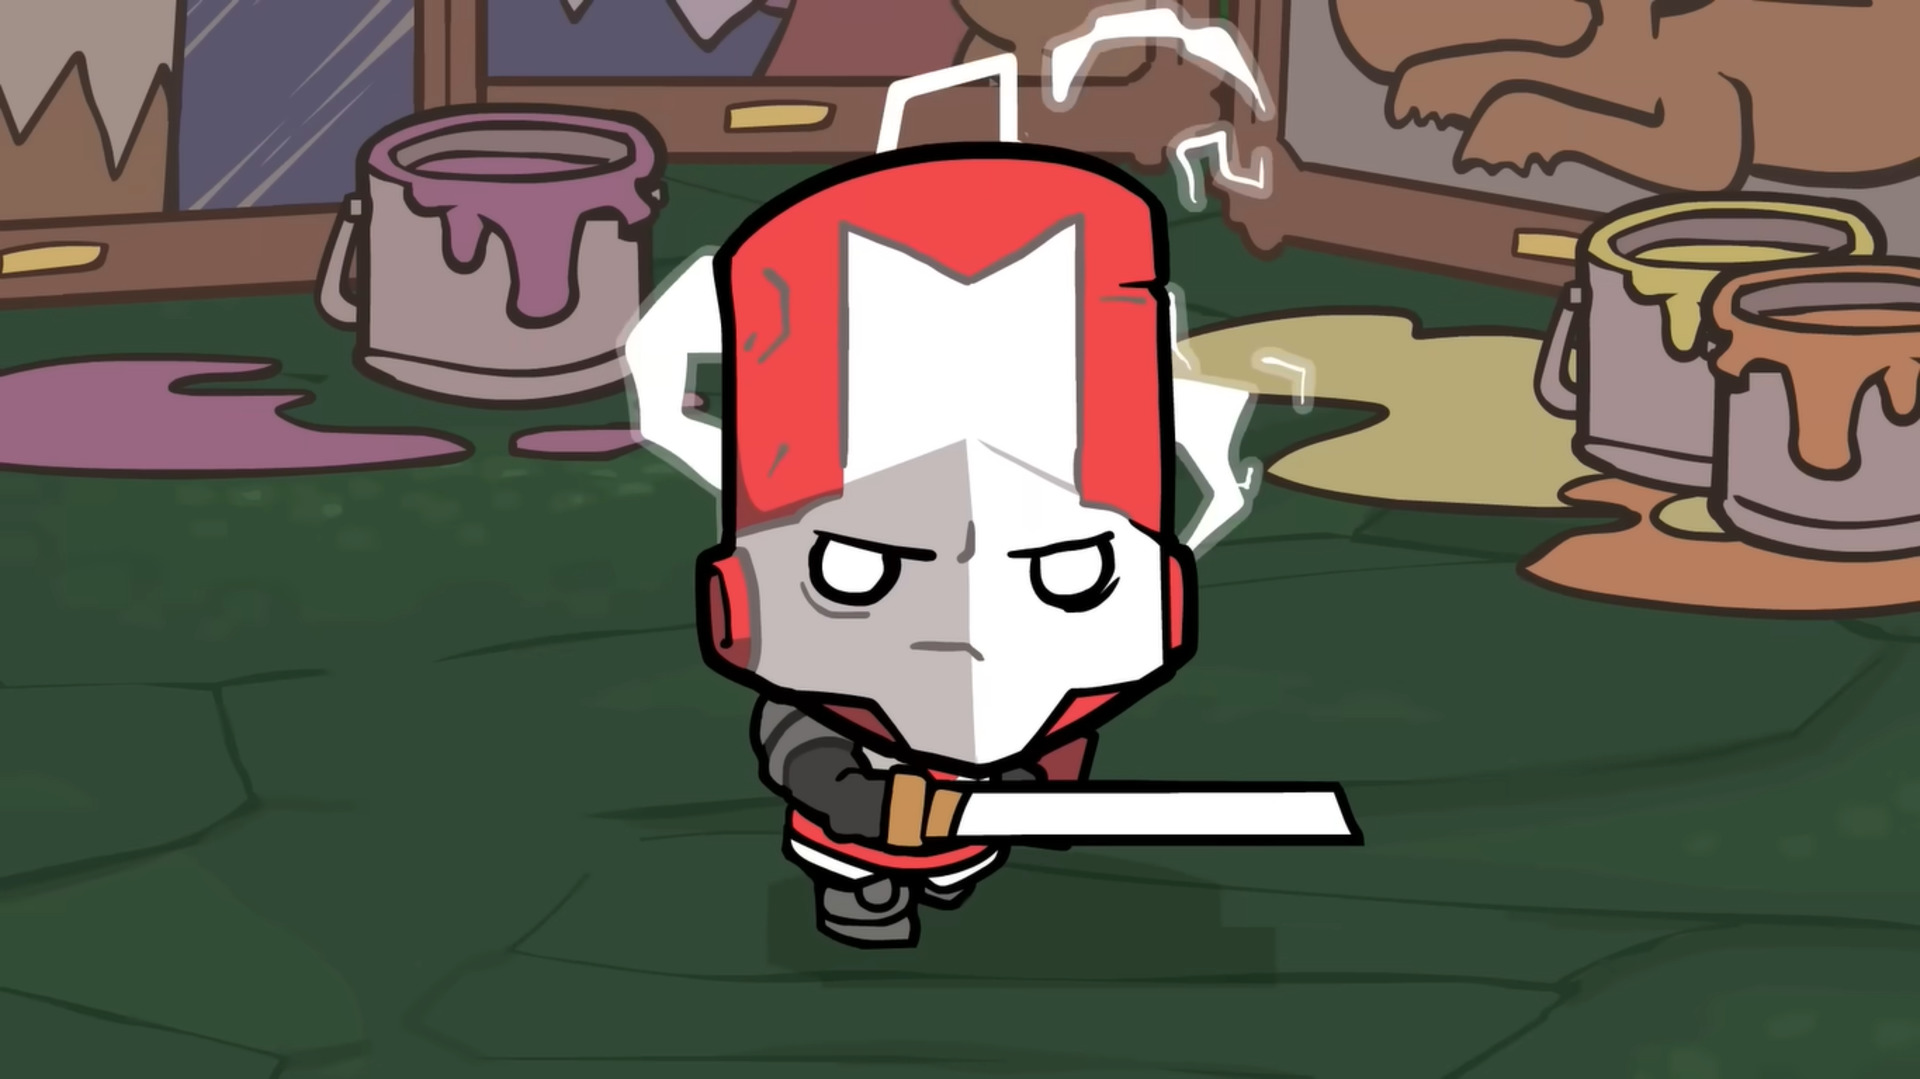  16 years later, beloved brawler RPG Castle Crashers is getting new DLC where you make your own characters that animate like magic 